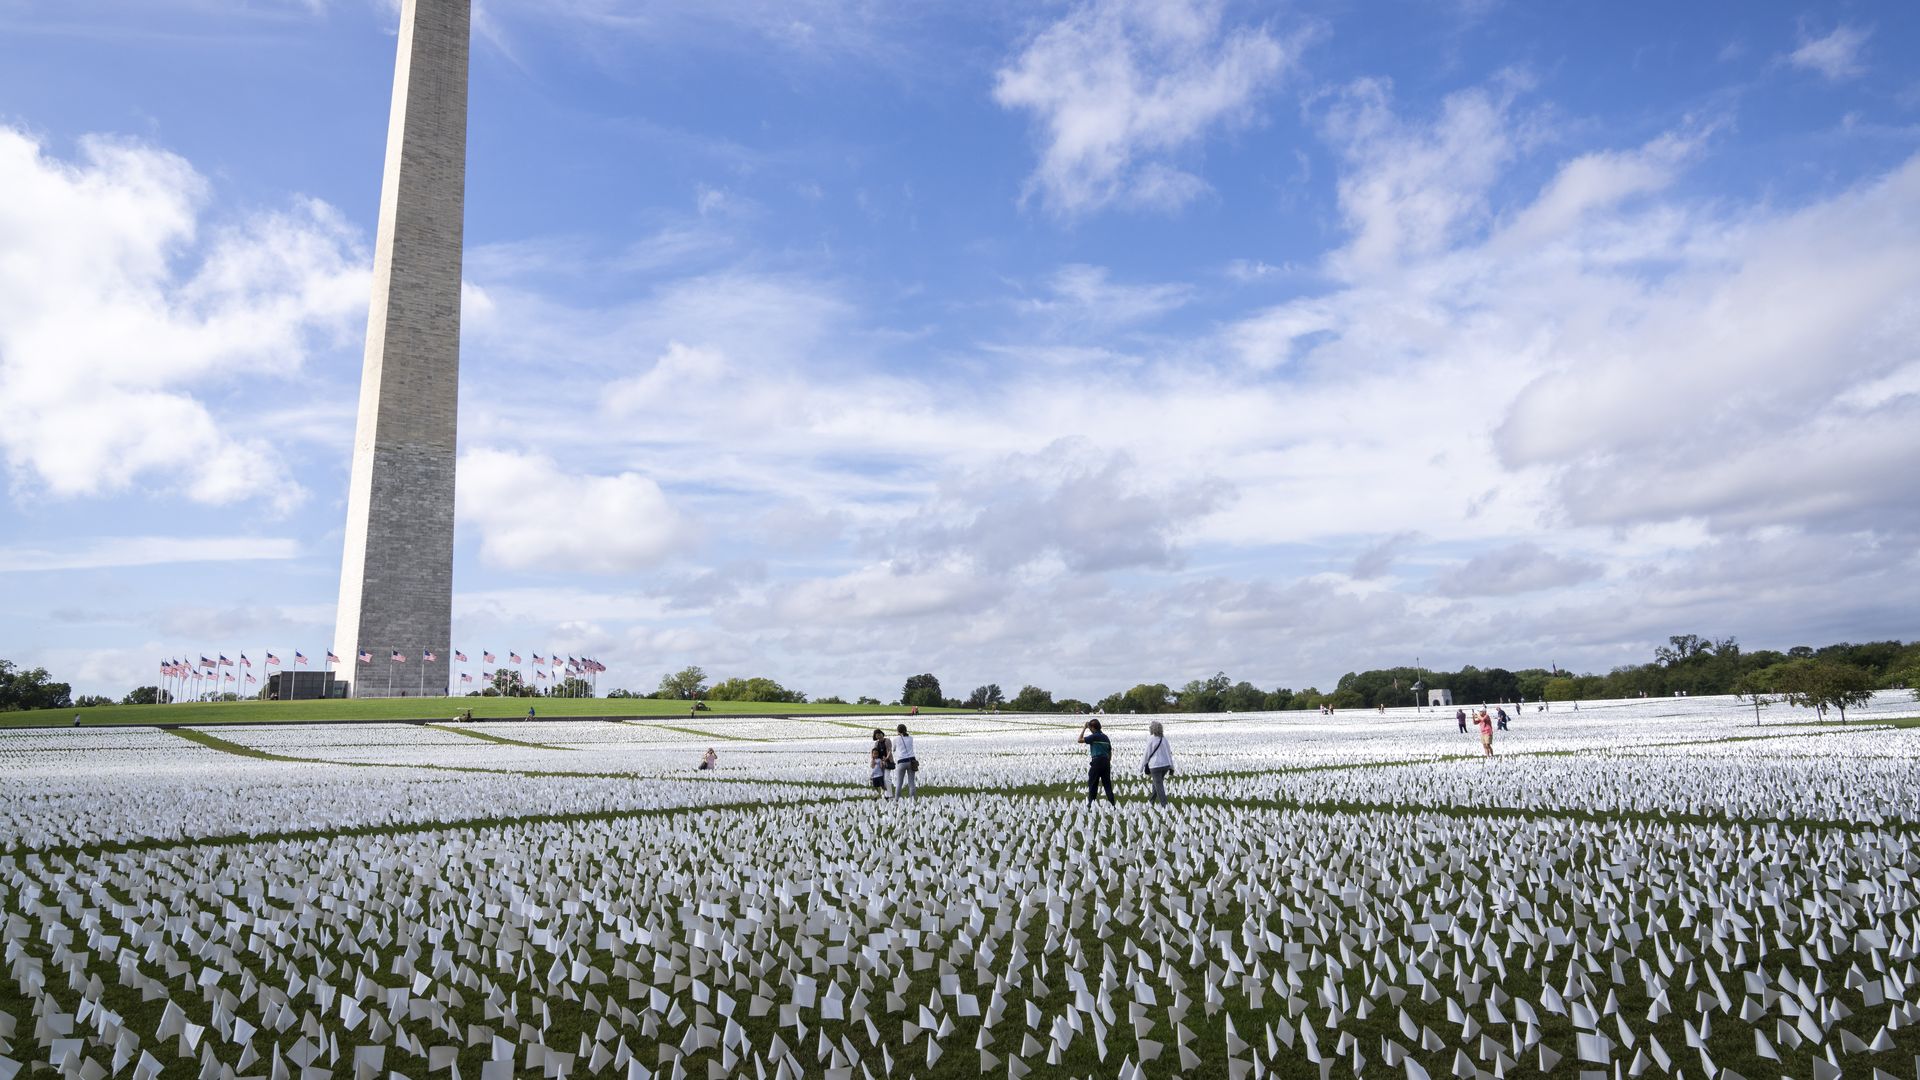 Photo of the Washington Monument towering over a green field with thousands of small white flags propped in the grass